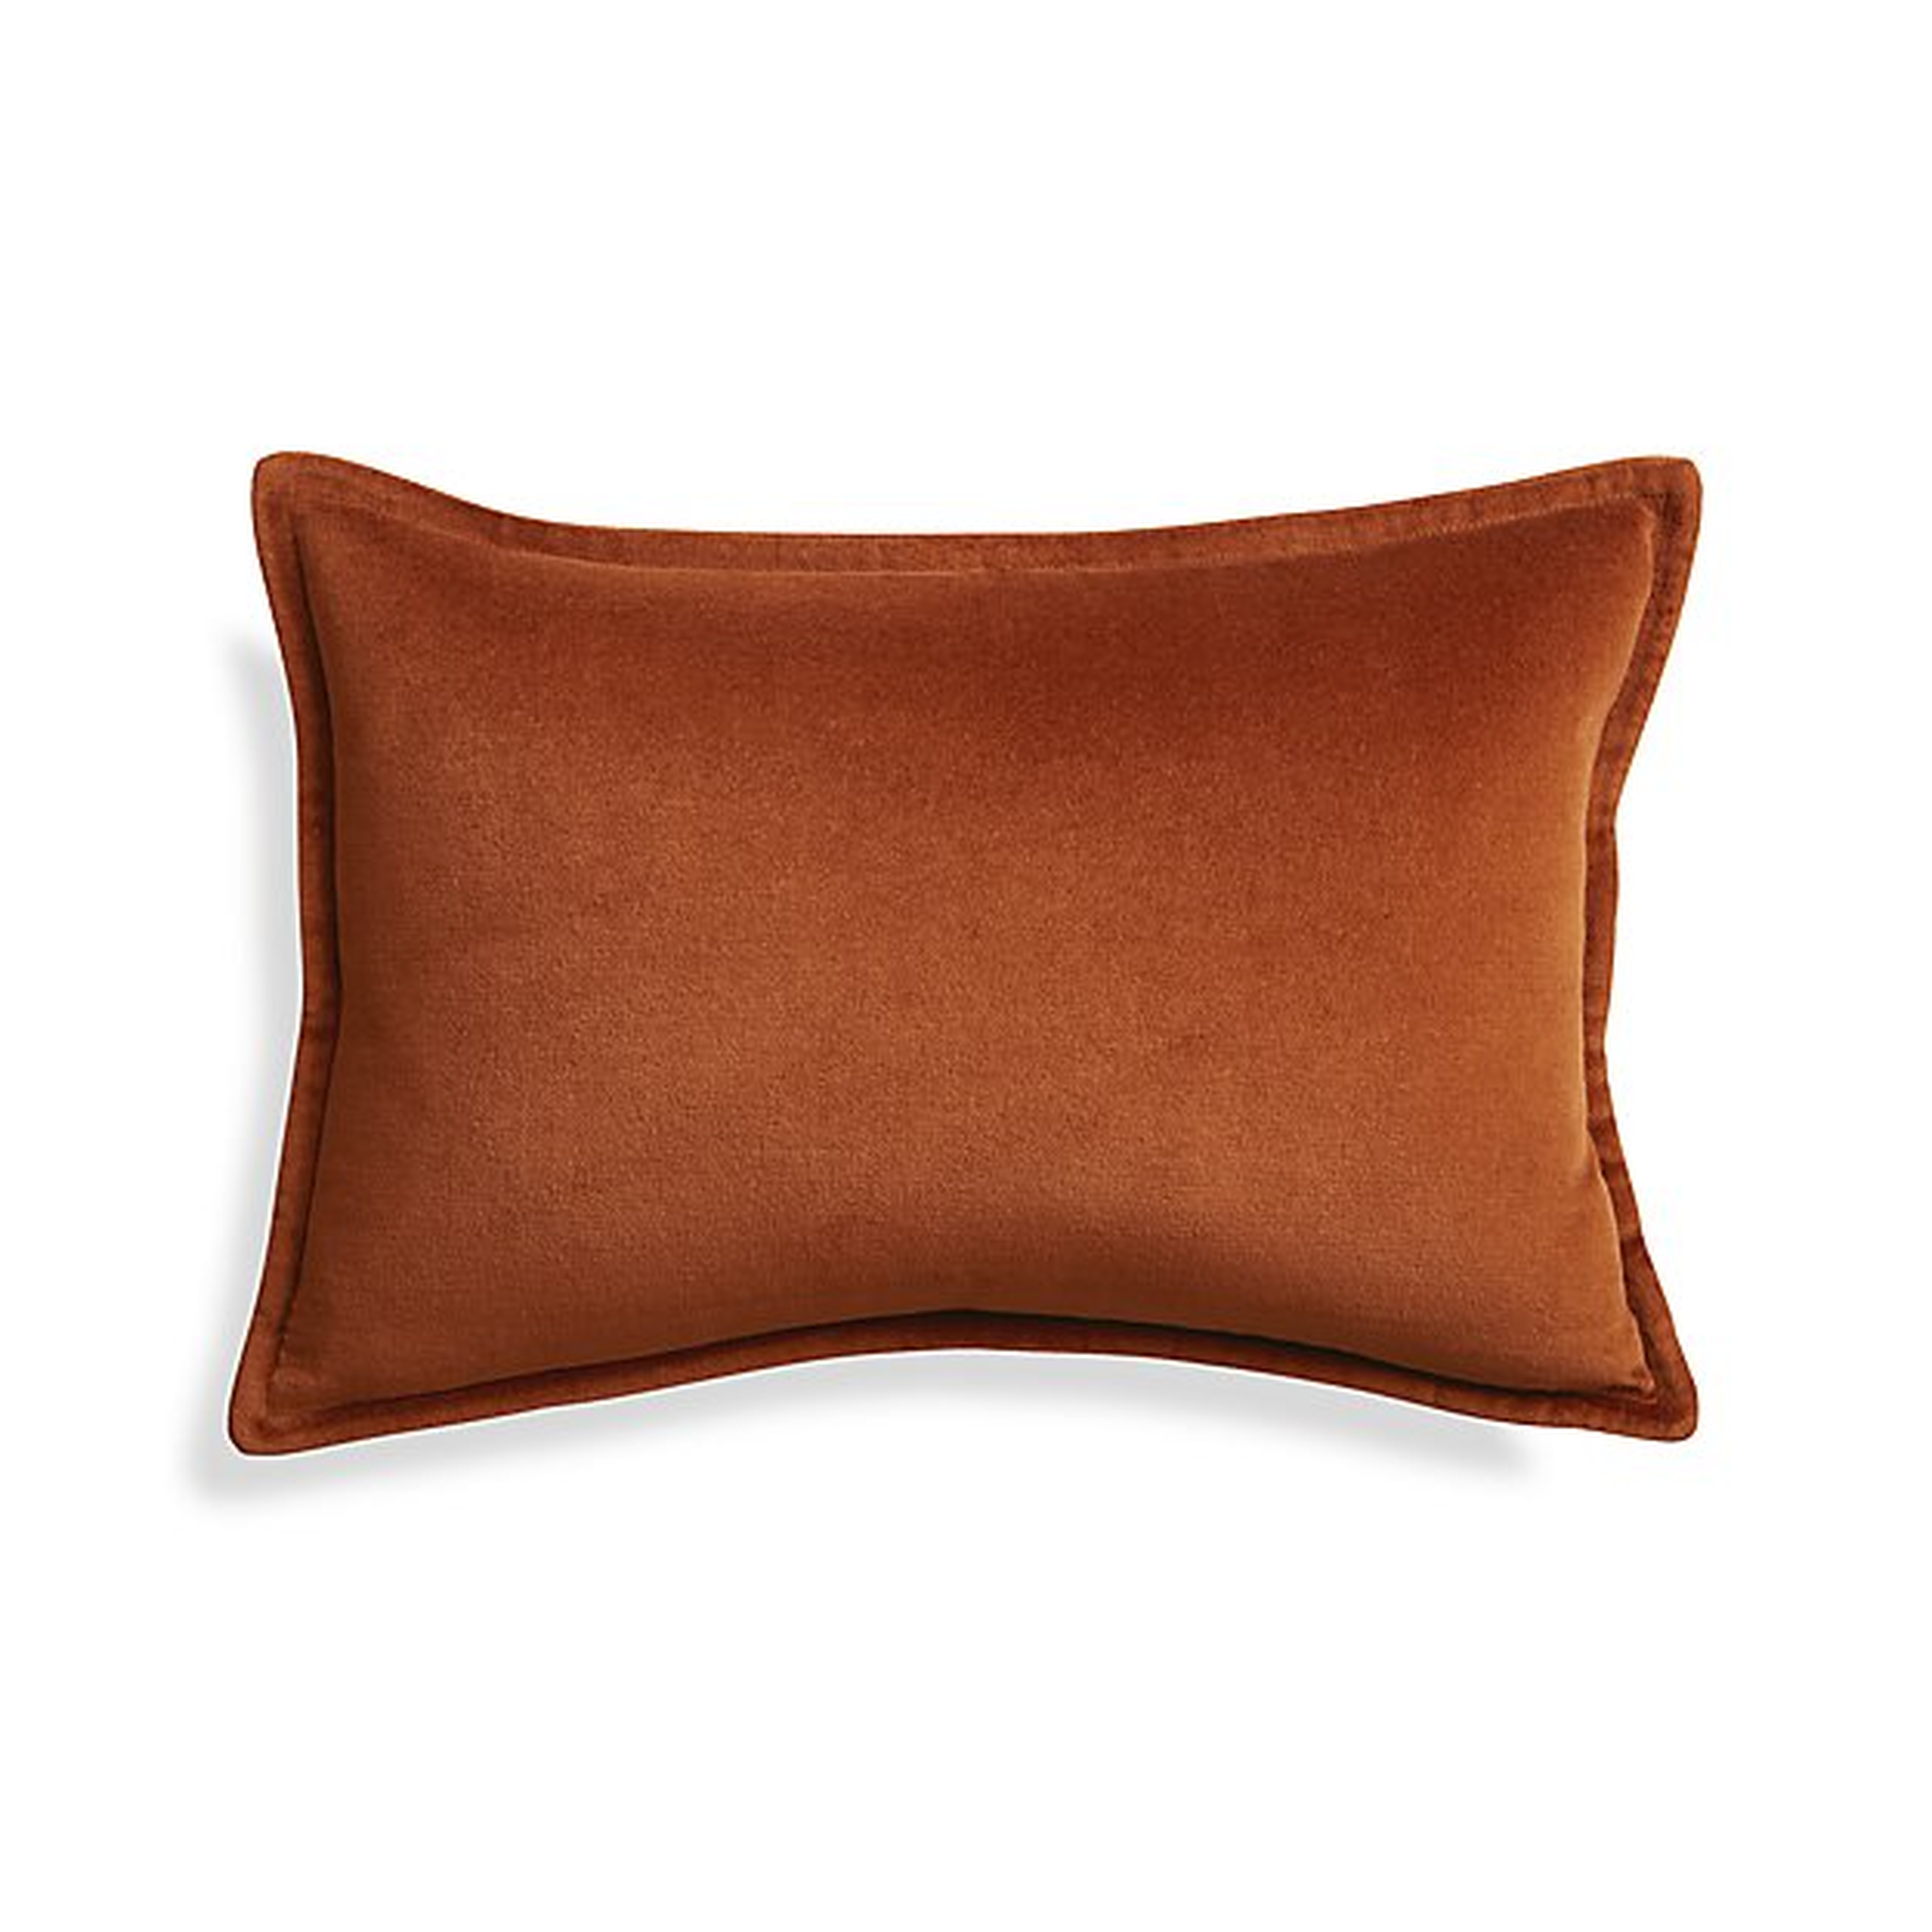 Brenner Rust 18"x12" Pillow with Down-Alternative Insert - Crate and Barrel